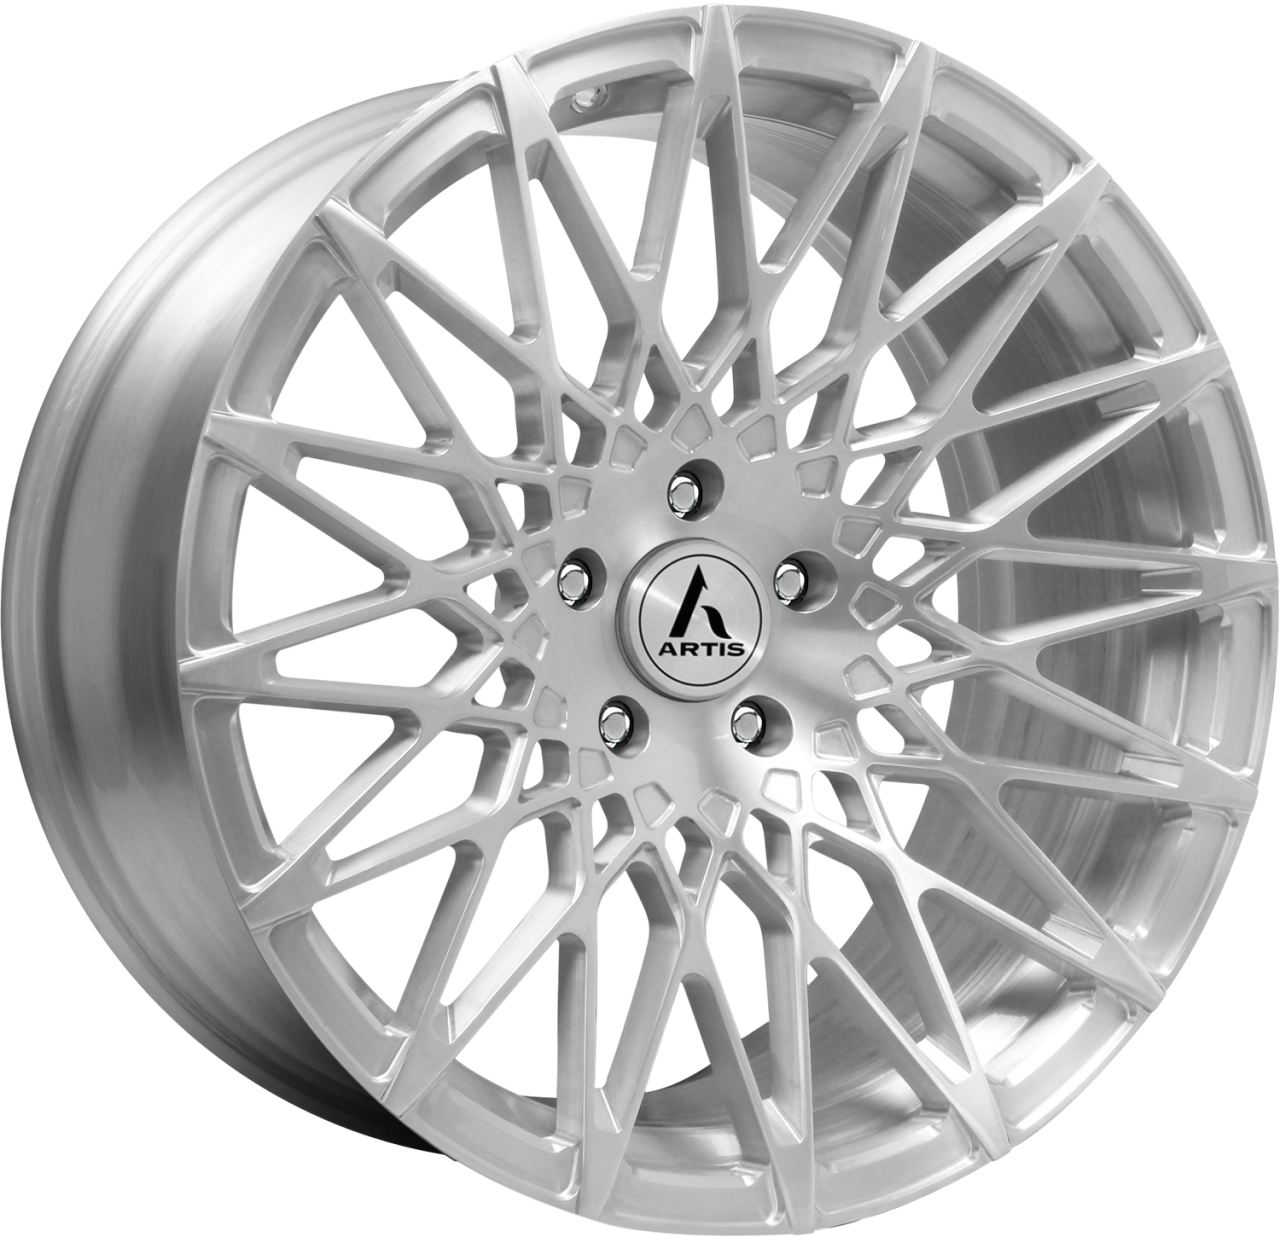 Artis Forged Monza-M wheel with Brushed finish